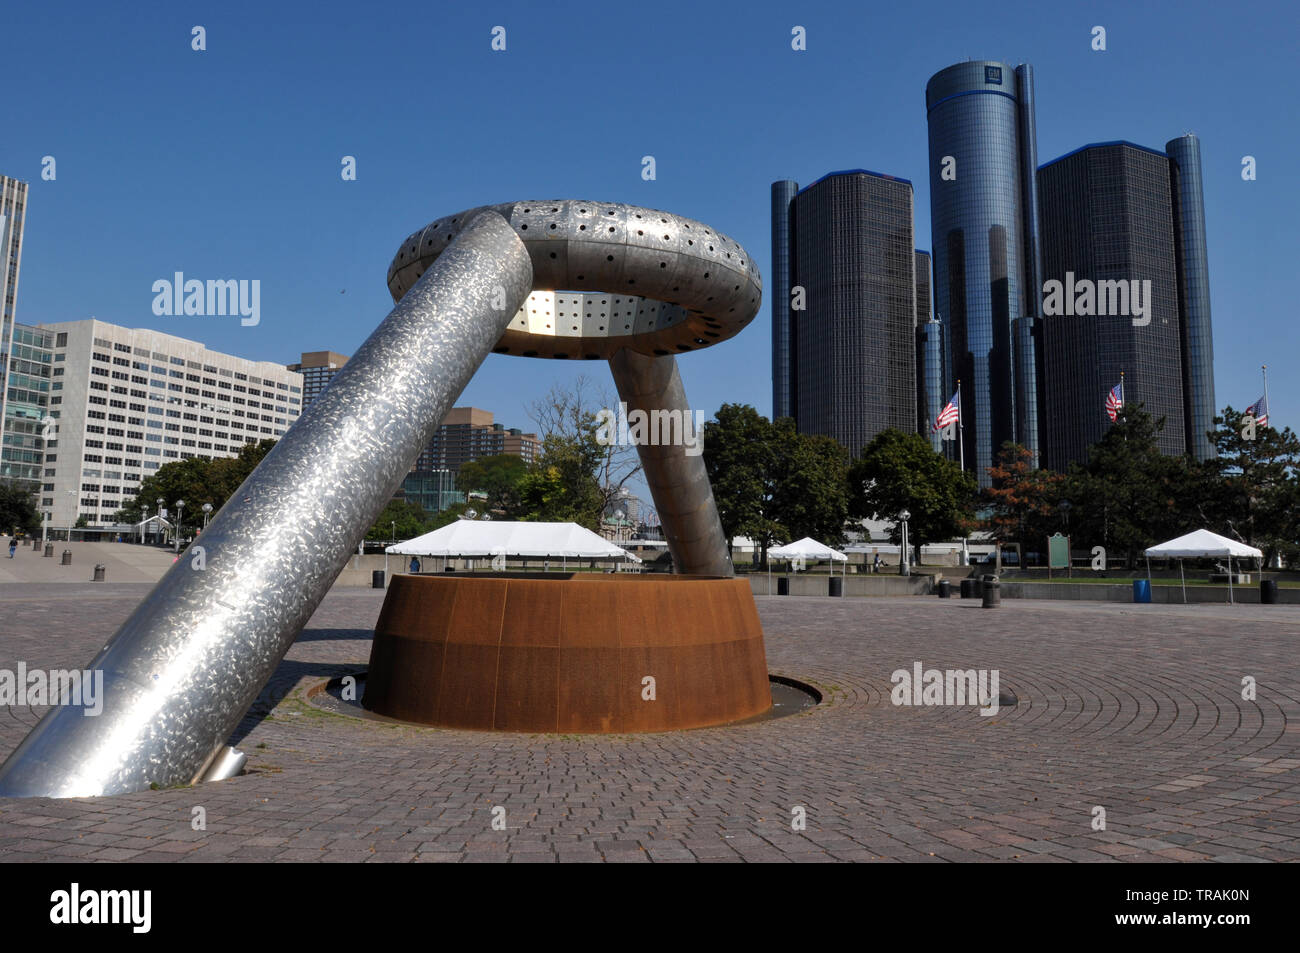 The  Horace E. Dodge and Son Memorial Fountain in Detroit's riverfront Hart Plaza, with General Motors' landmark Renaissance Center in the background. Stock Photo